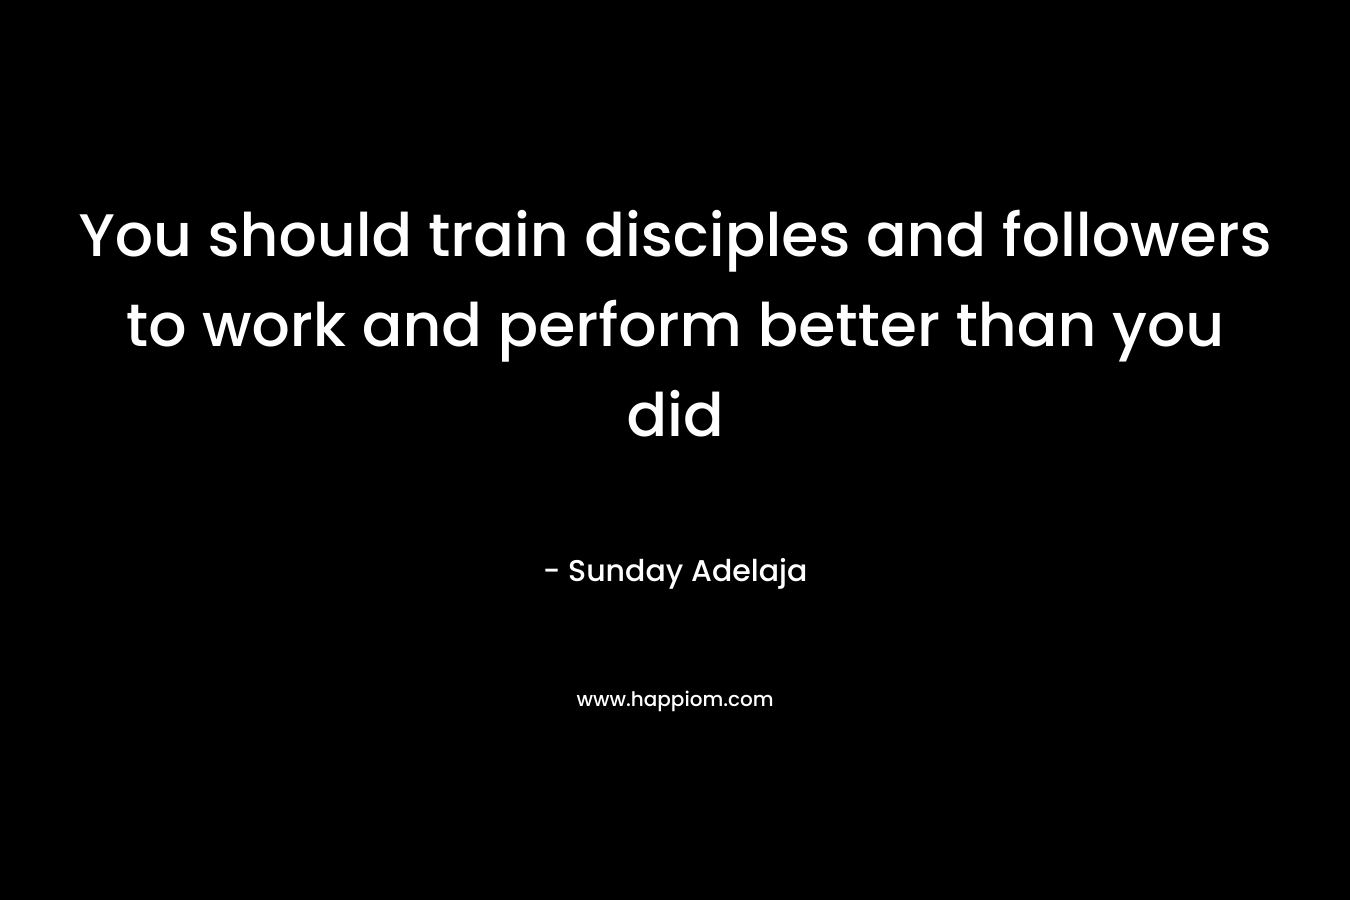 You should train disciples and followers to work and perform better than you did – Sunday Adelaja